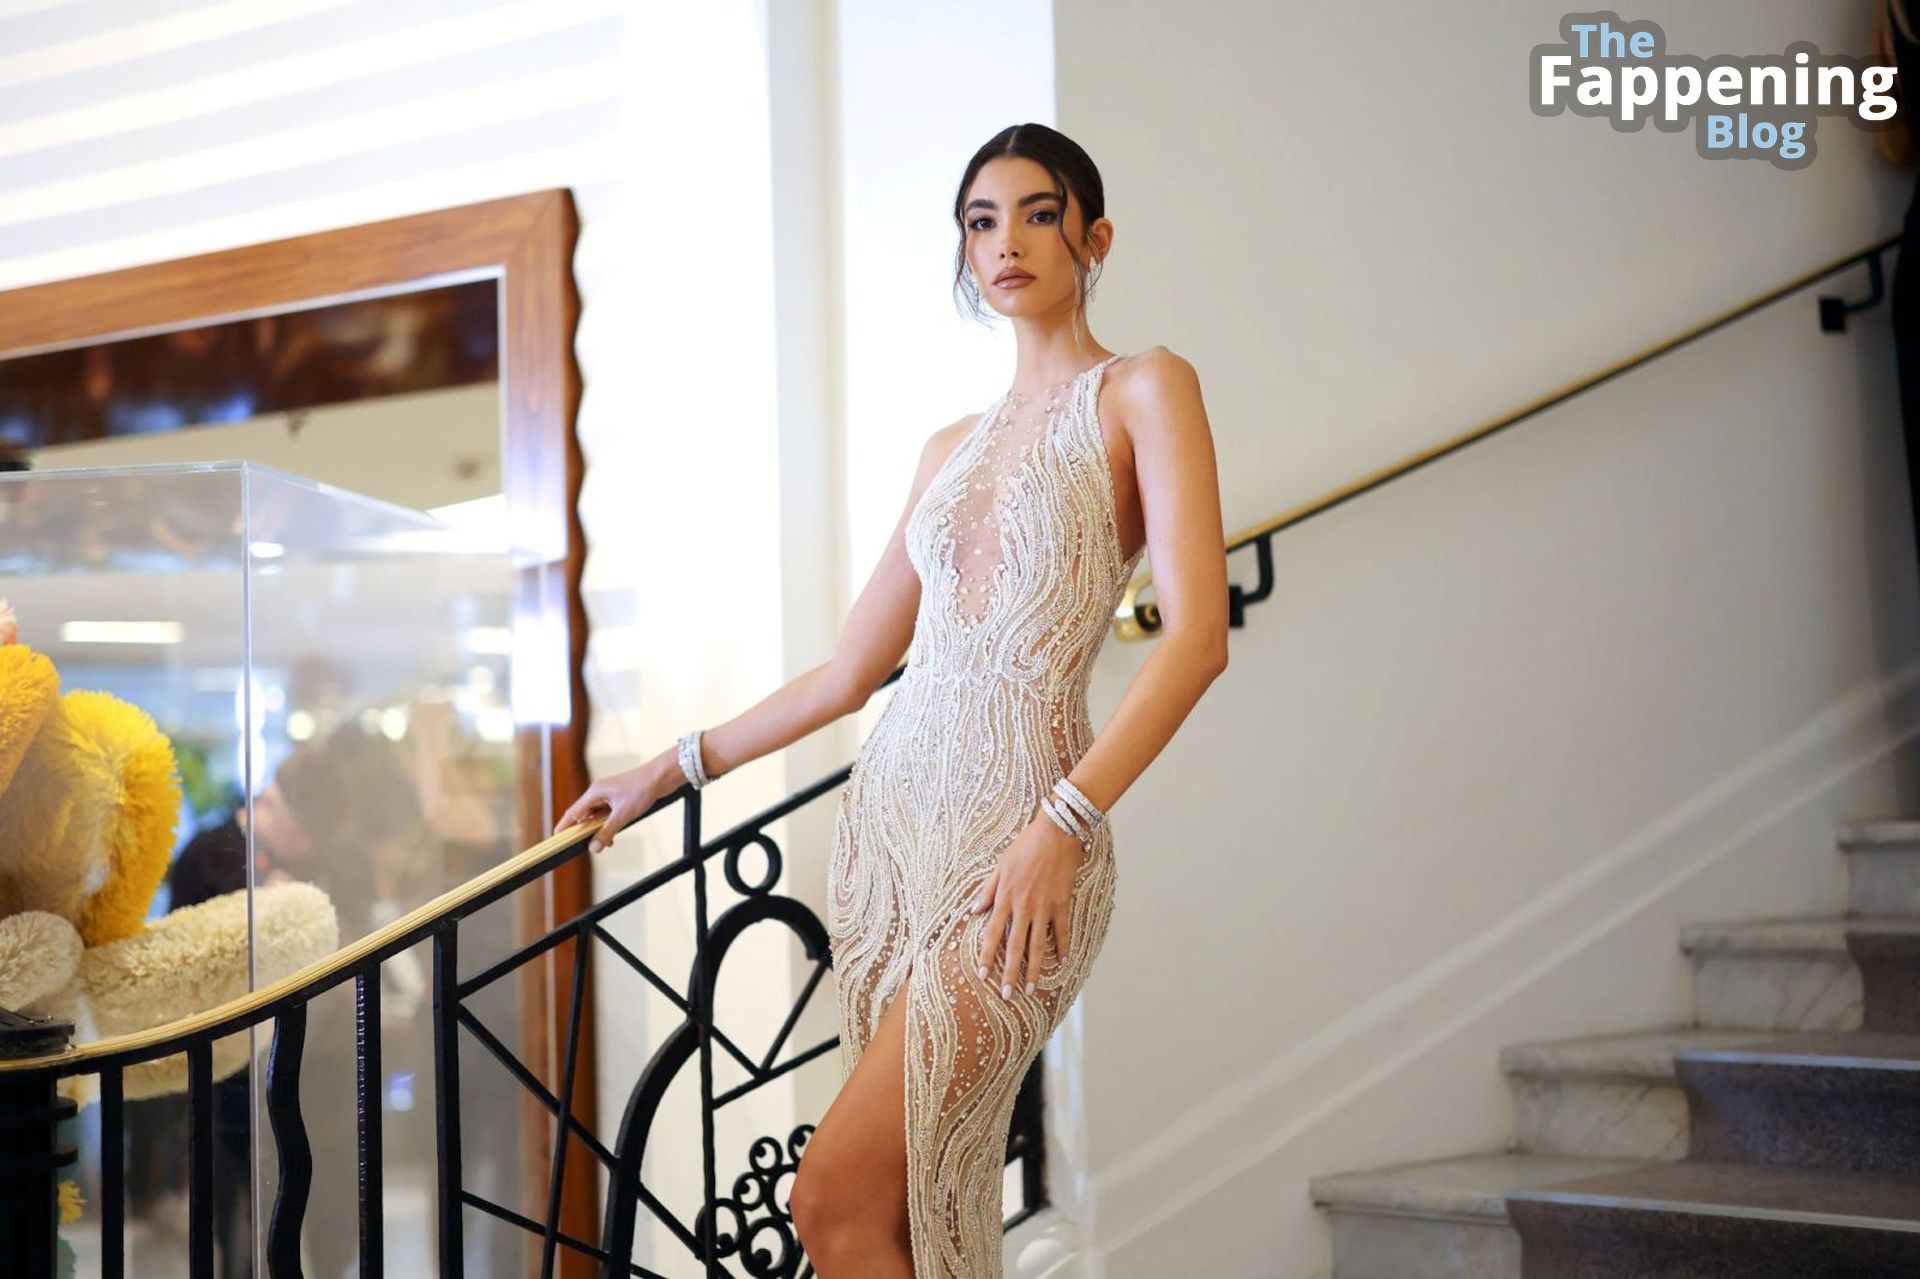 Cindy Mello Displays Her Beautiful Figure at the “La Passion De Dodin Bouffant” Red Carpet in Cannes (26 Photos)